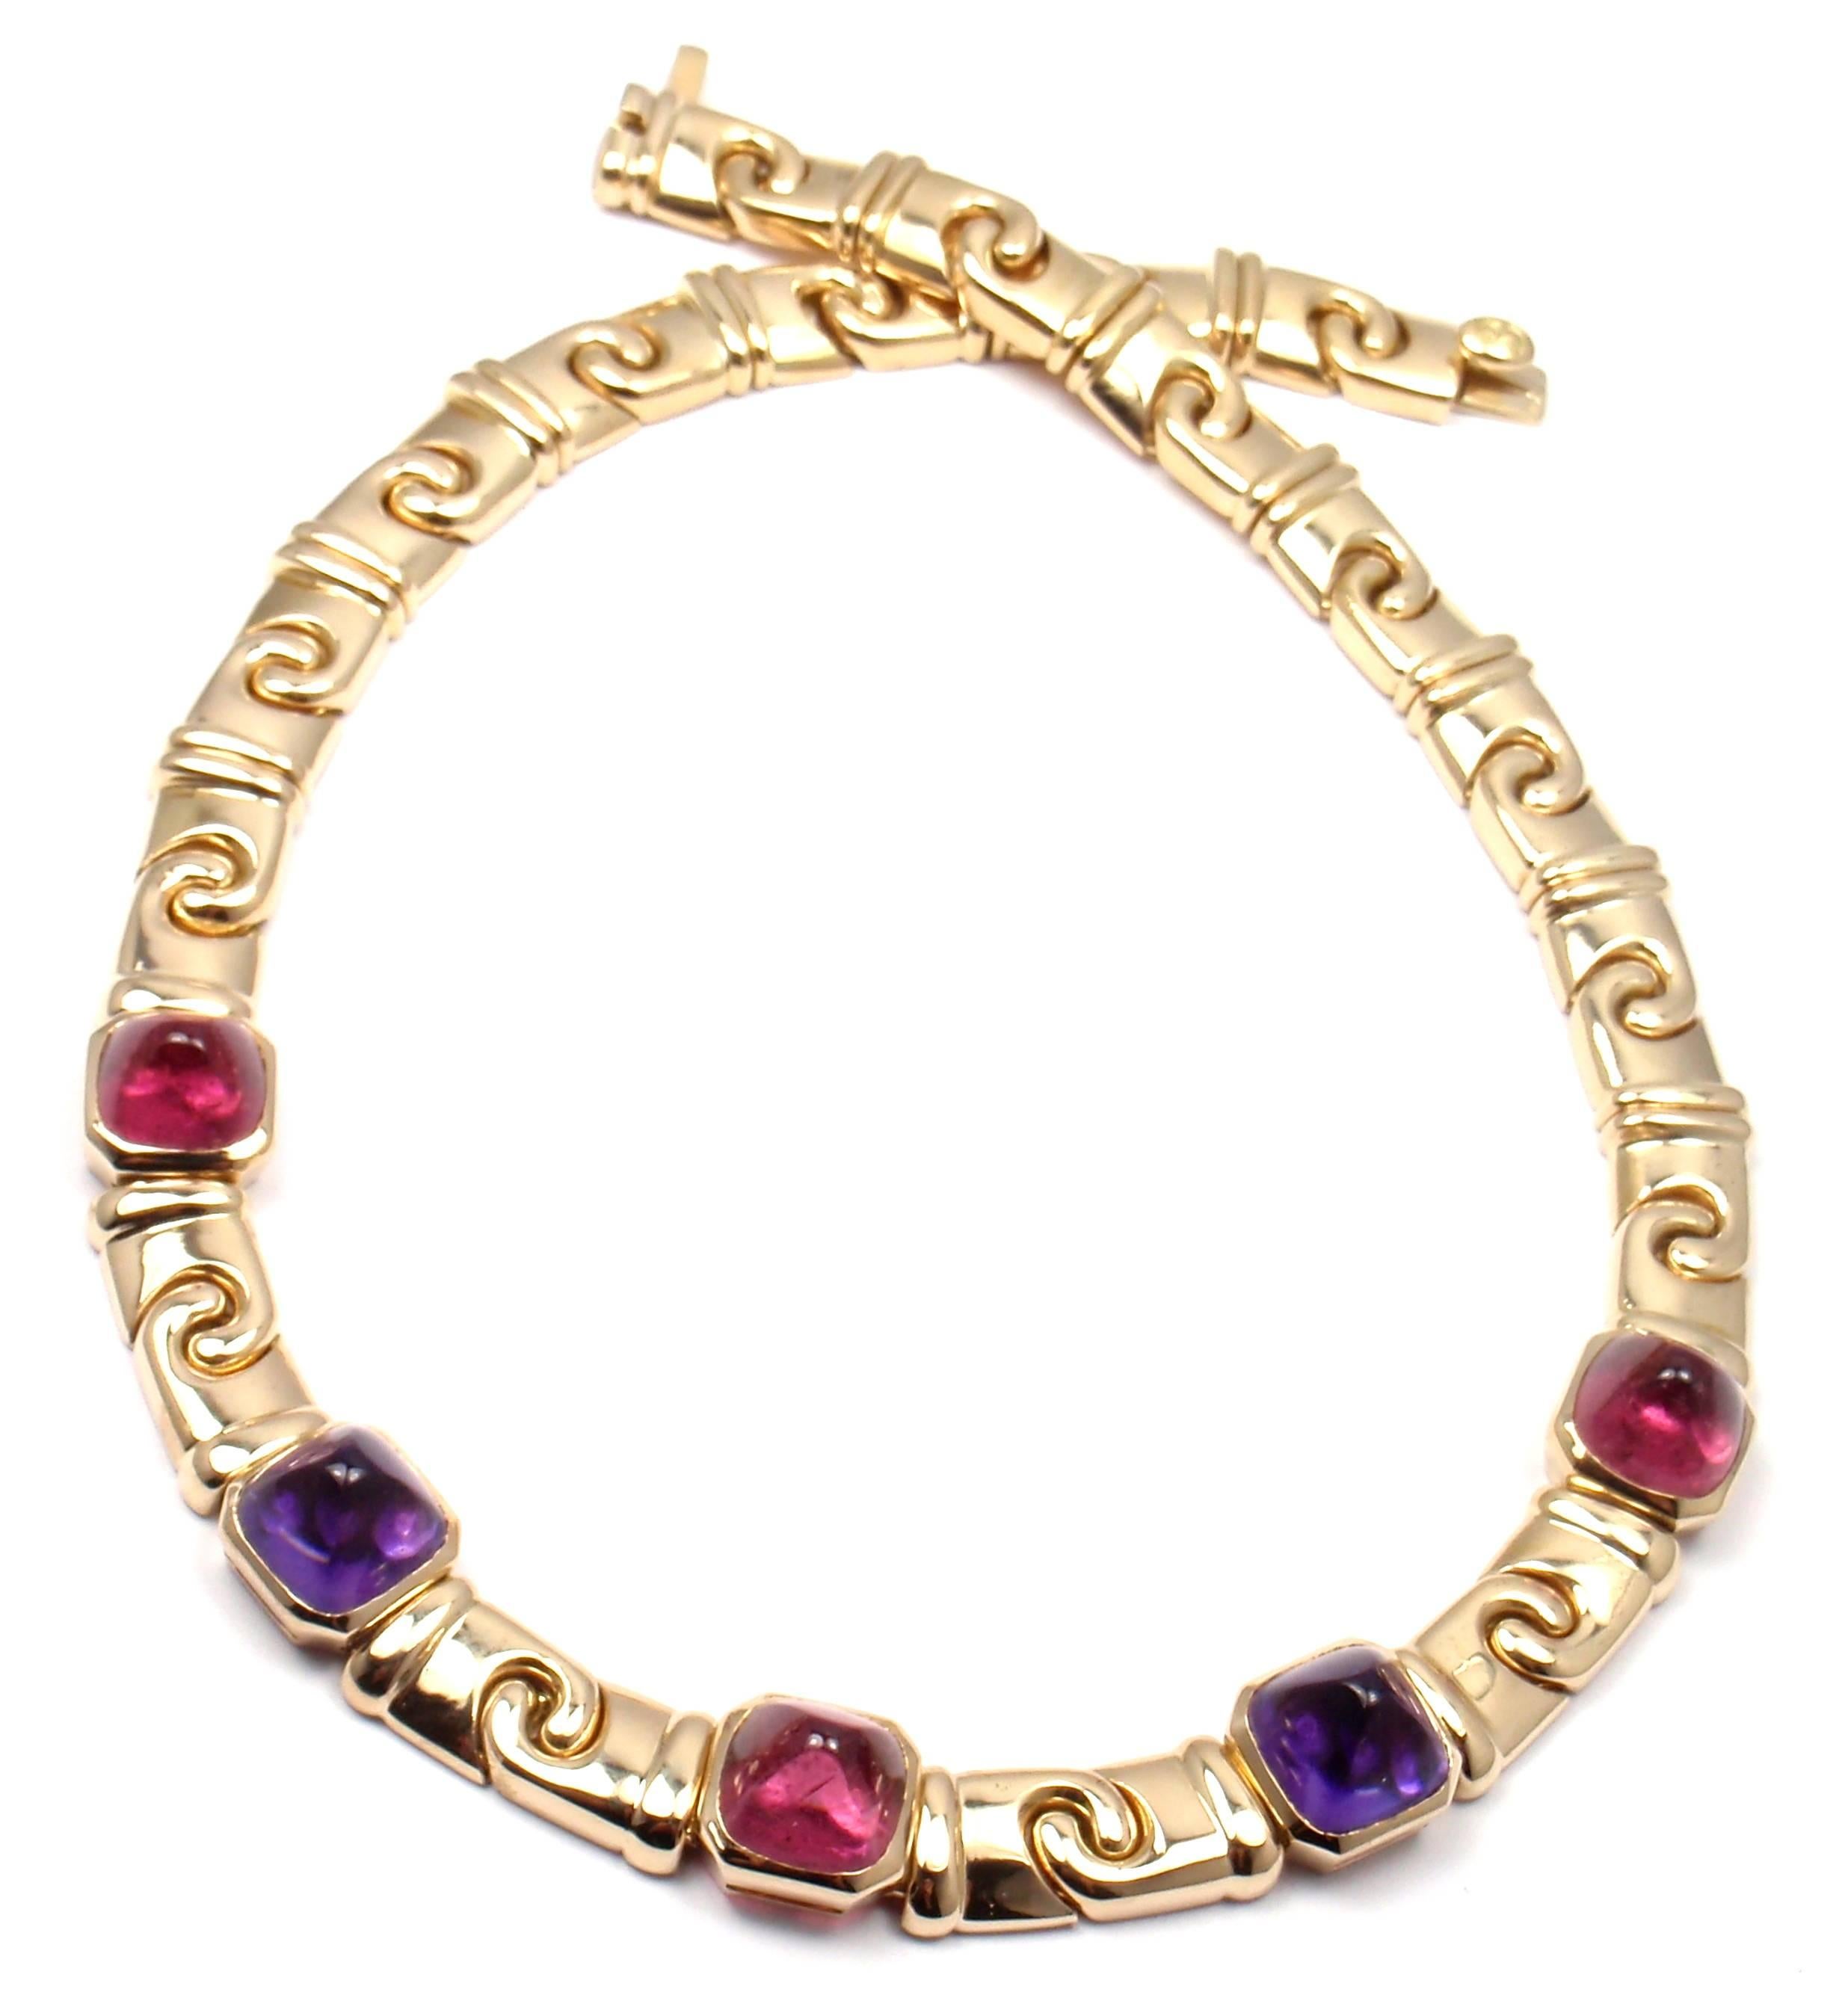 18k Yellow Gold Amethyst & Pink Tourmaline Sugarloaf Cabochon Link Necklace by Bulgari. 
This necklace comes with an original Bulgari box. 
With 2 sugarloaf cabochon amethysts 10mm x 13mm
3 sugarloaf cabochon pink tourmalines 10mm x